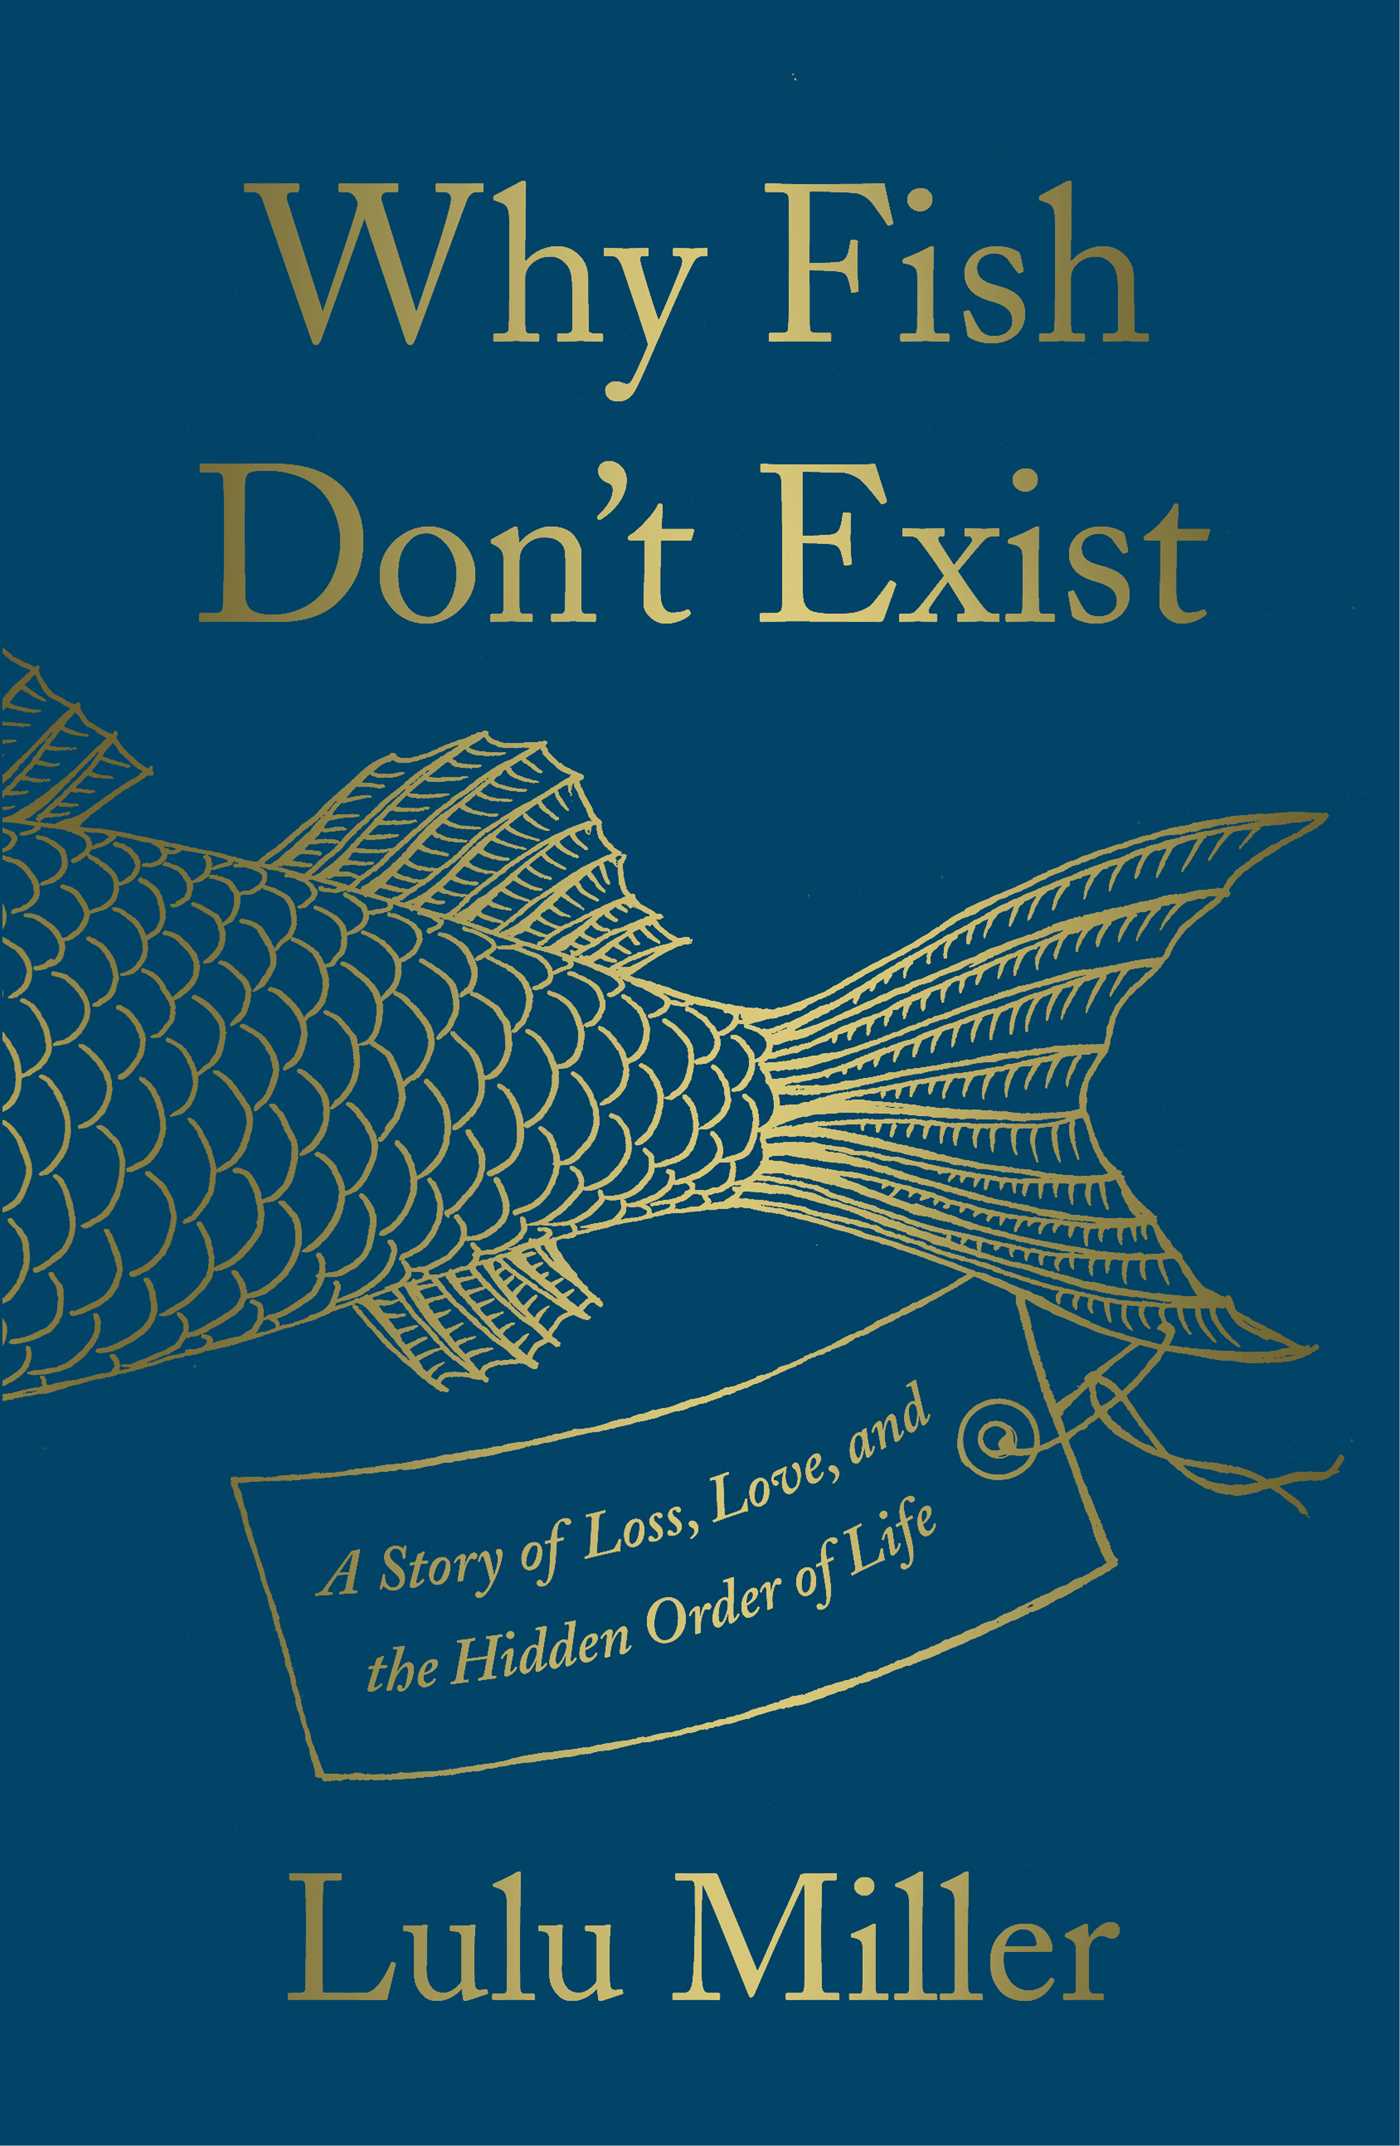 Why Fish Don't Exist by Lulu Miller PDF Download